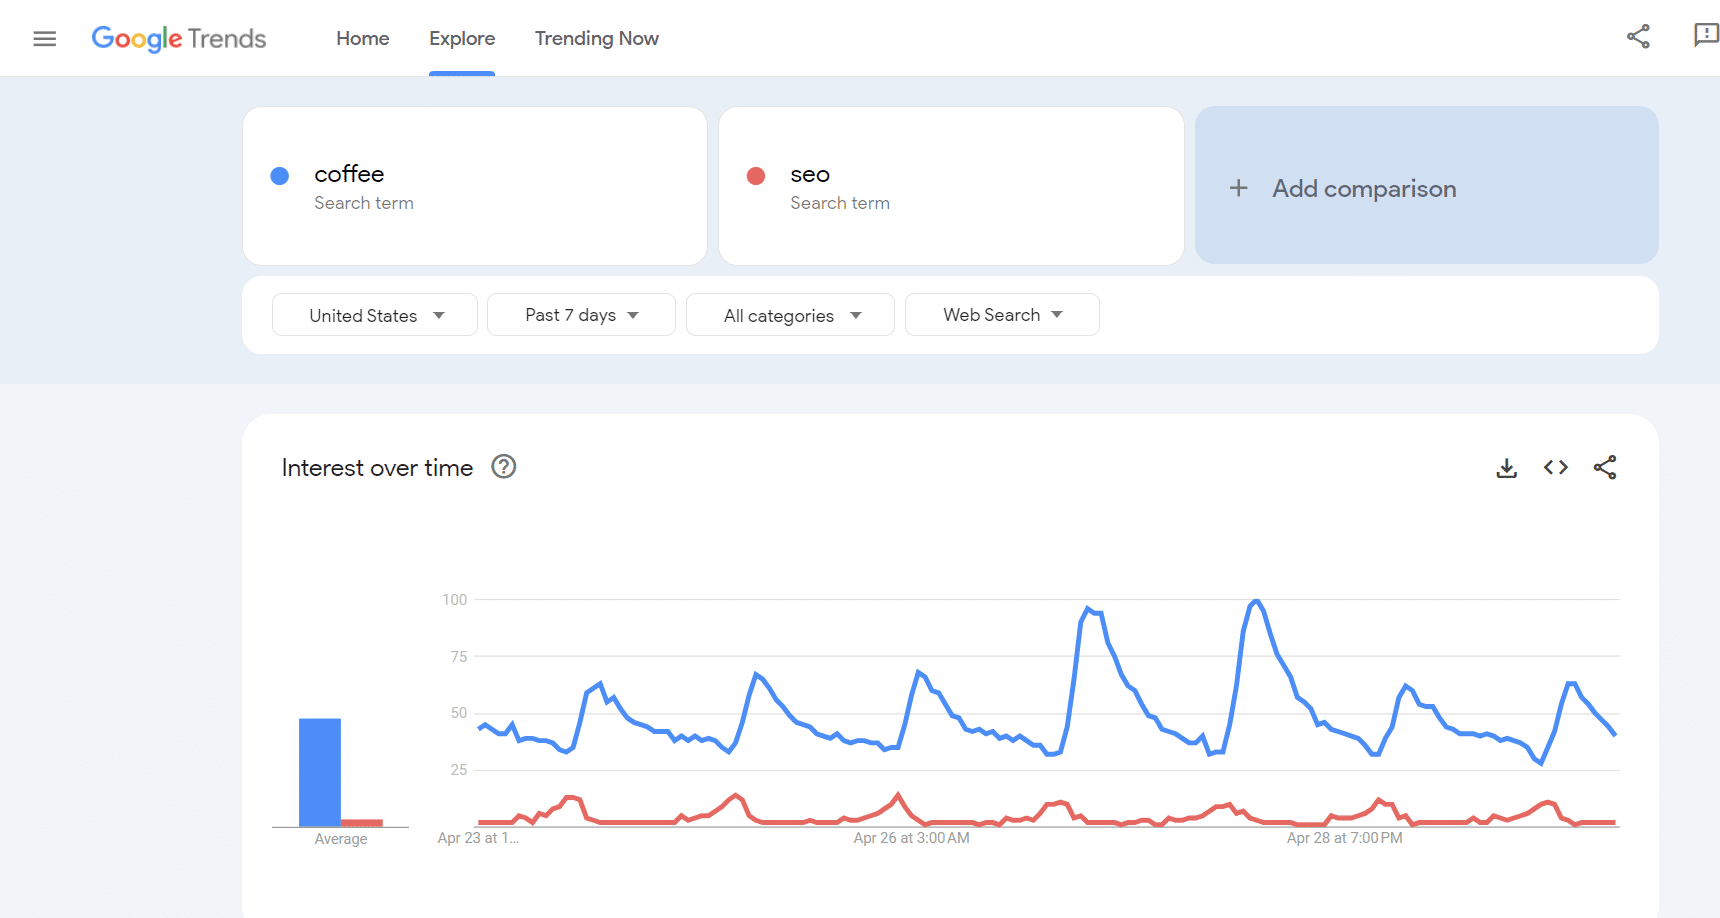 Google Trends showing the search trending for Coffee and SEO across the United States.